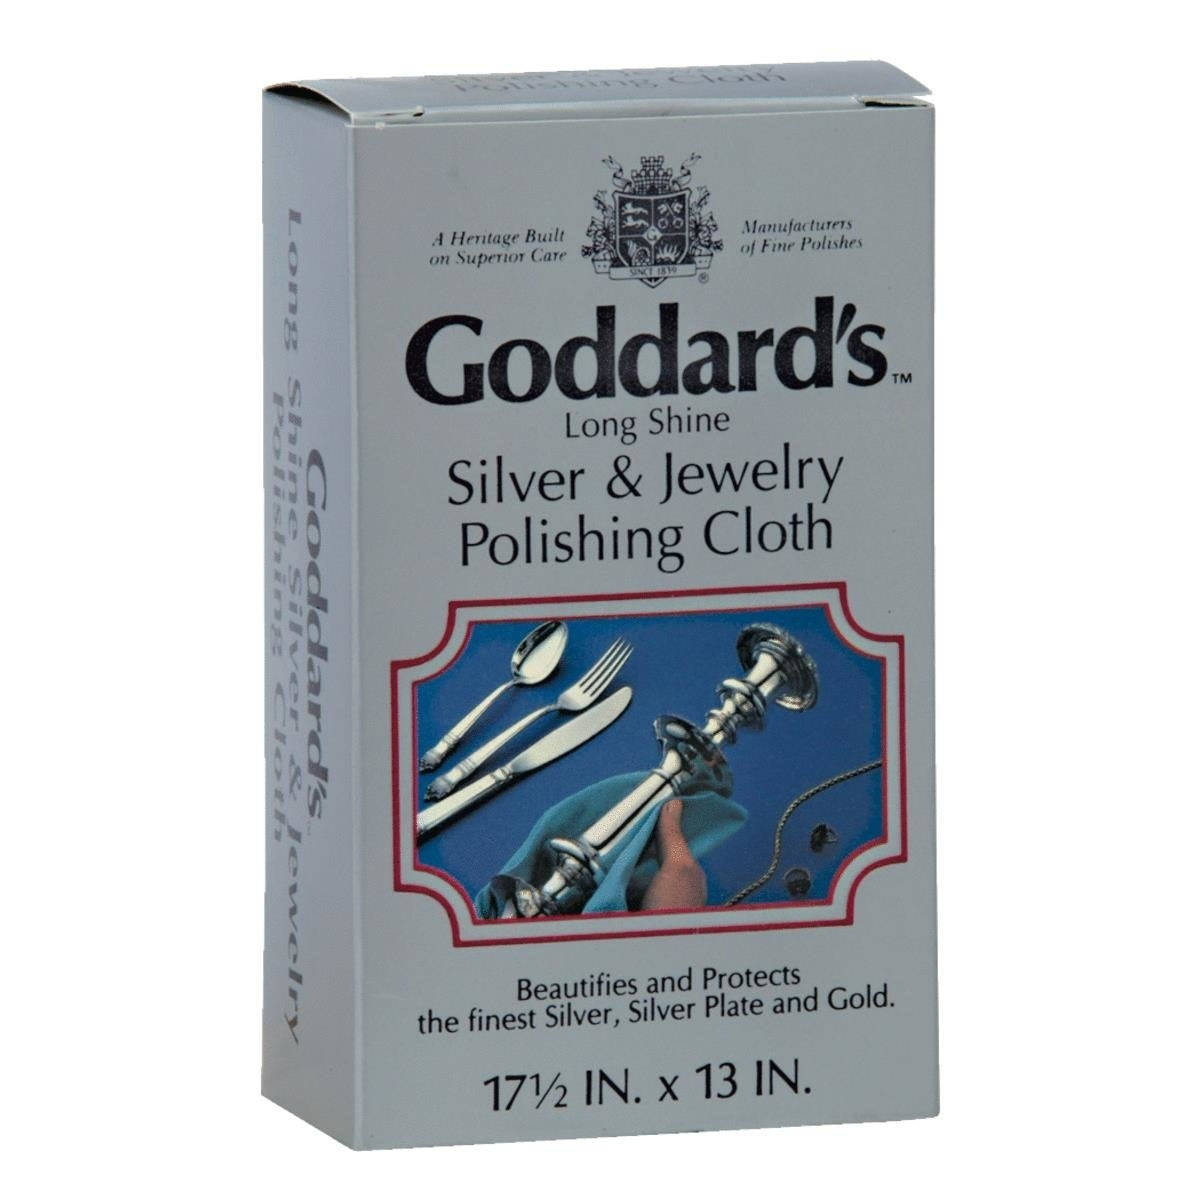 Goddard's Long Shine Silver Care Cloth – Johnnie Chuoke's Home and Hardware